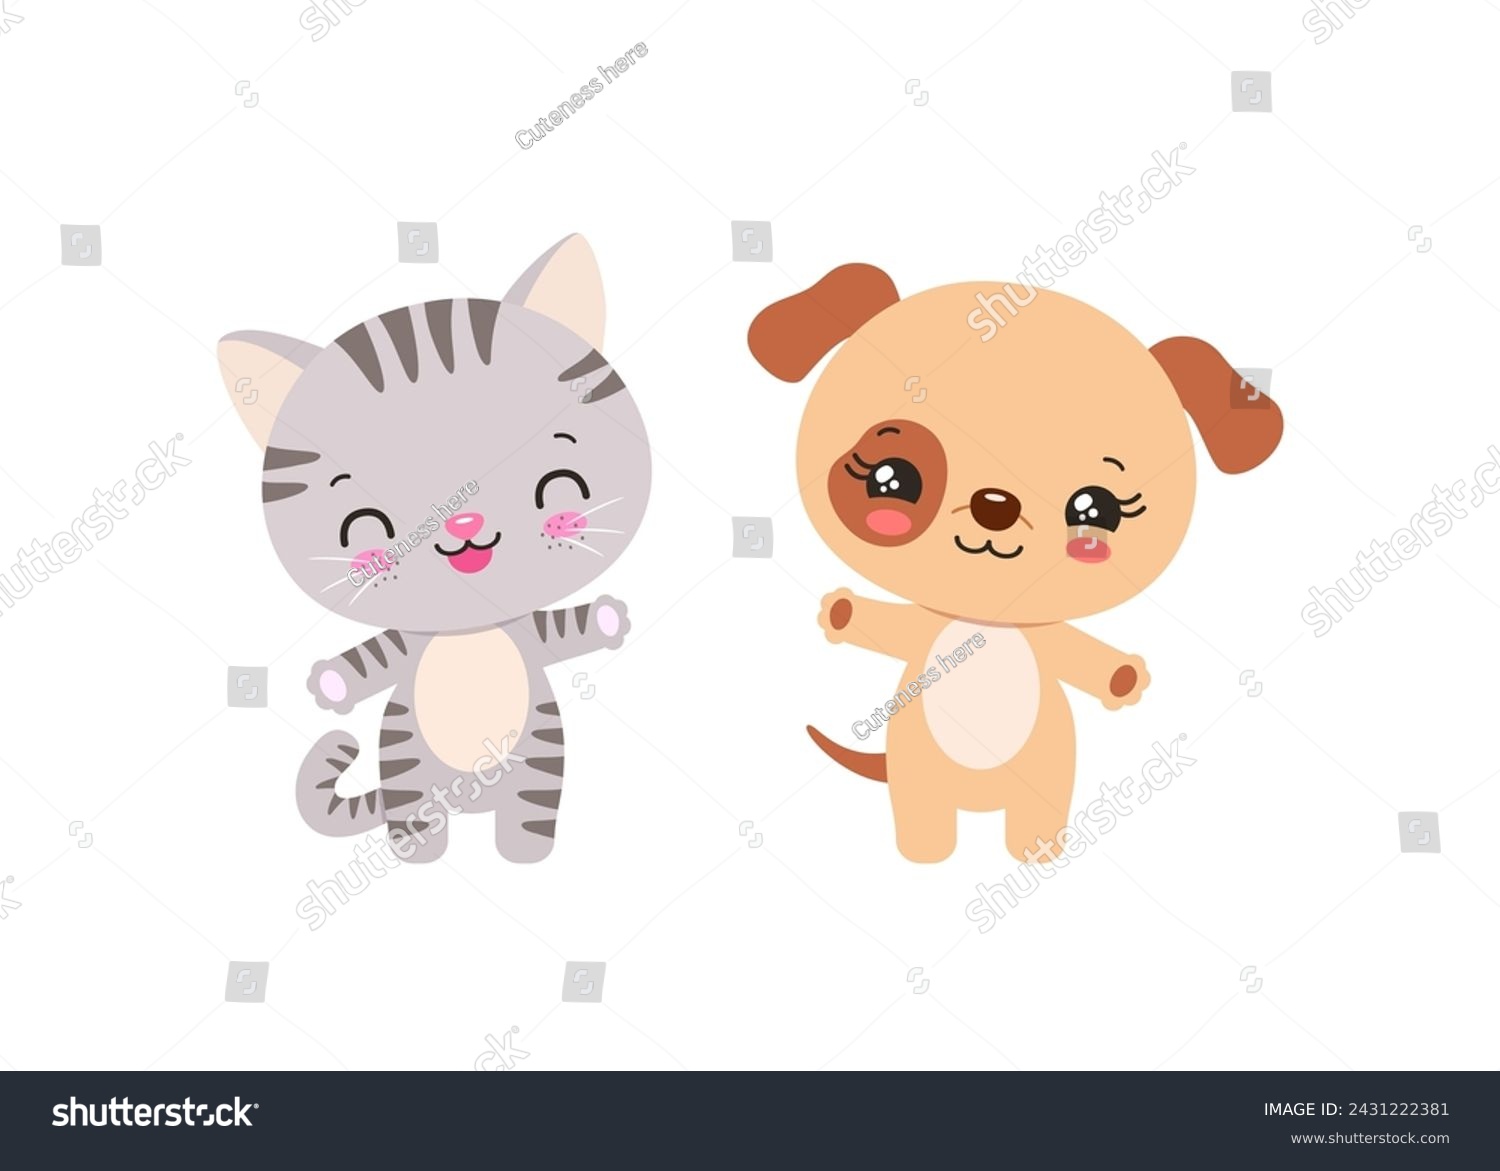 SVG of Kawaii cat and dog cute pets chibi animals. Anime asian cartoon style animal characters. Adorable kitten and puppy smiling waving. Little baby cat and dog children vector illustration. svg